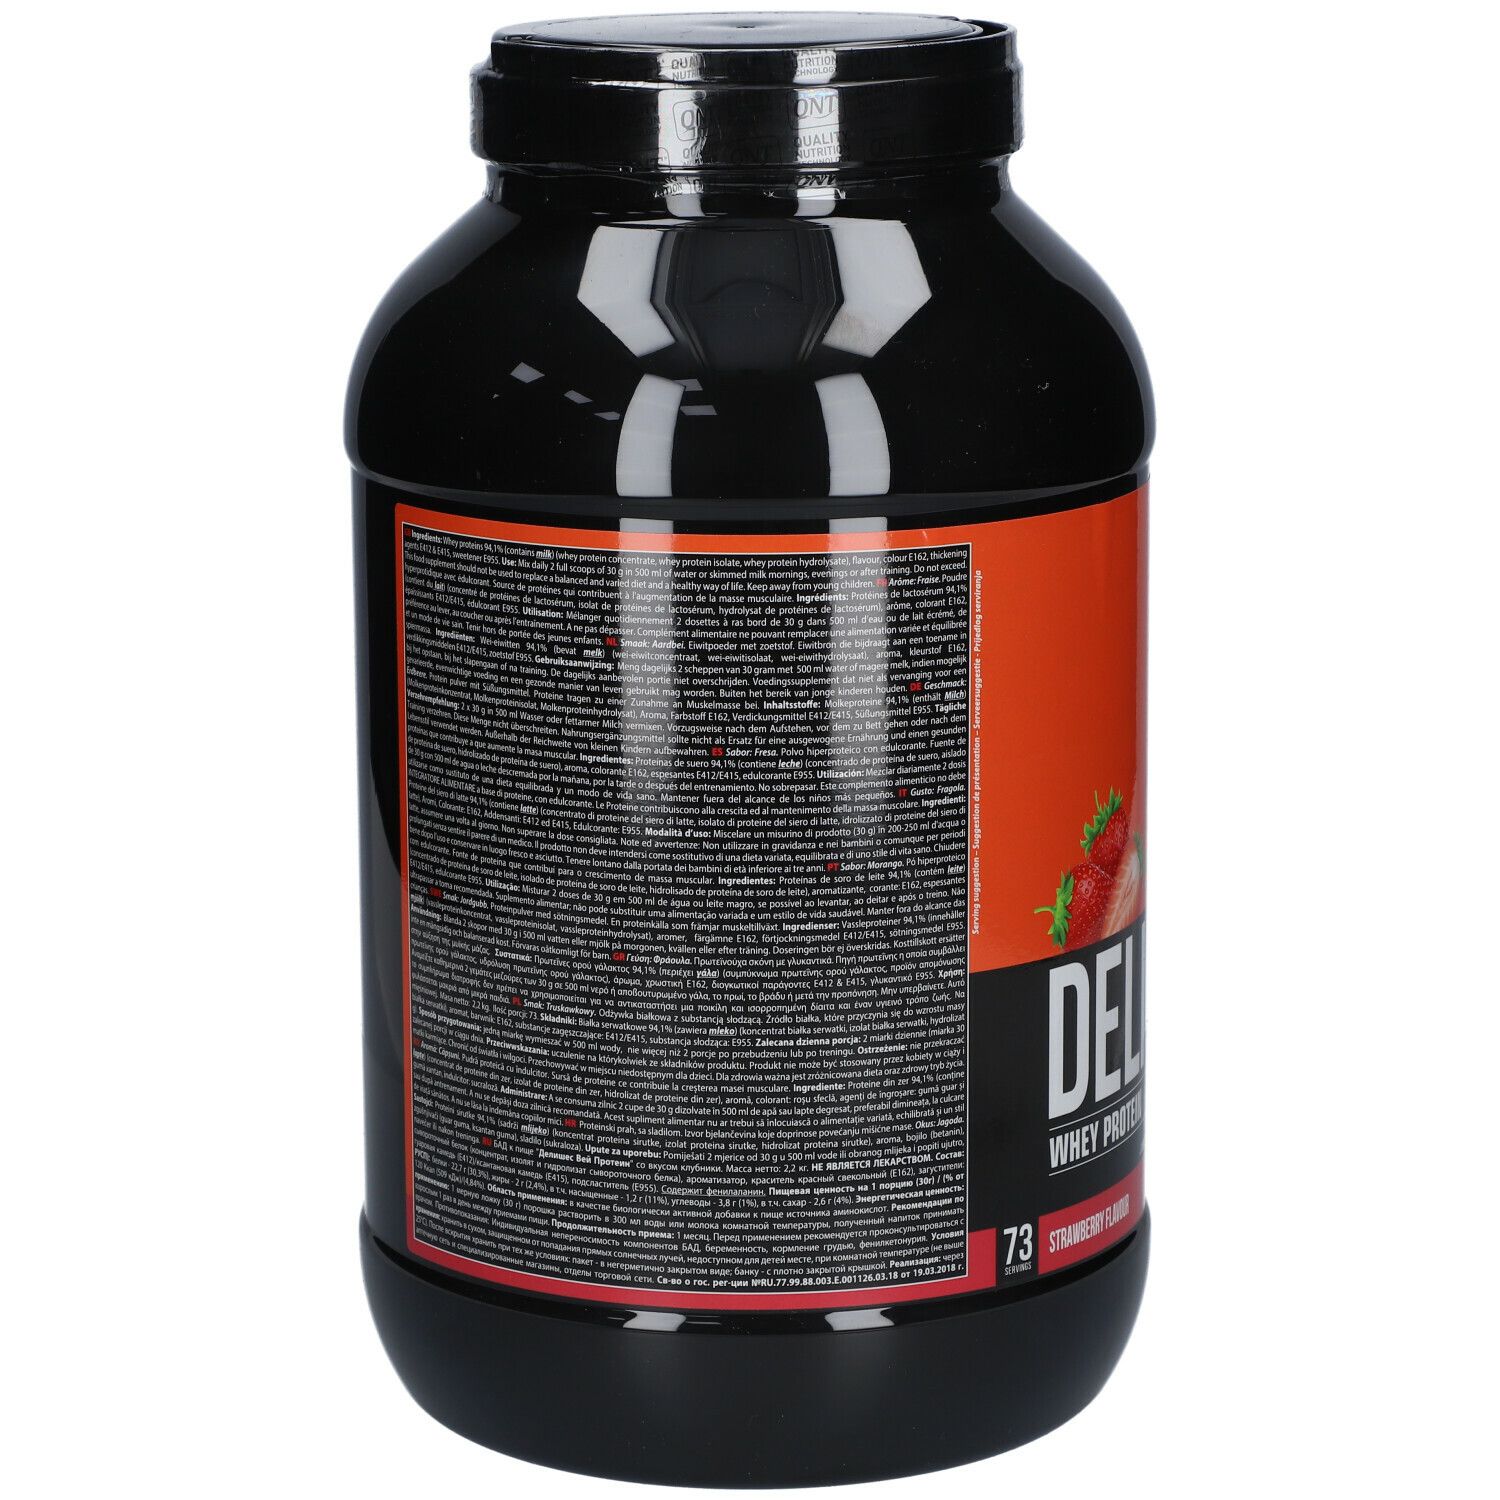 QNT Delicious Whey Protein Aardbei